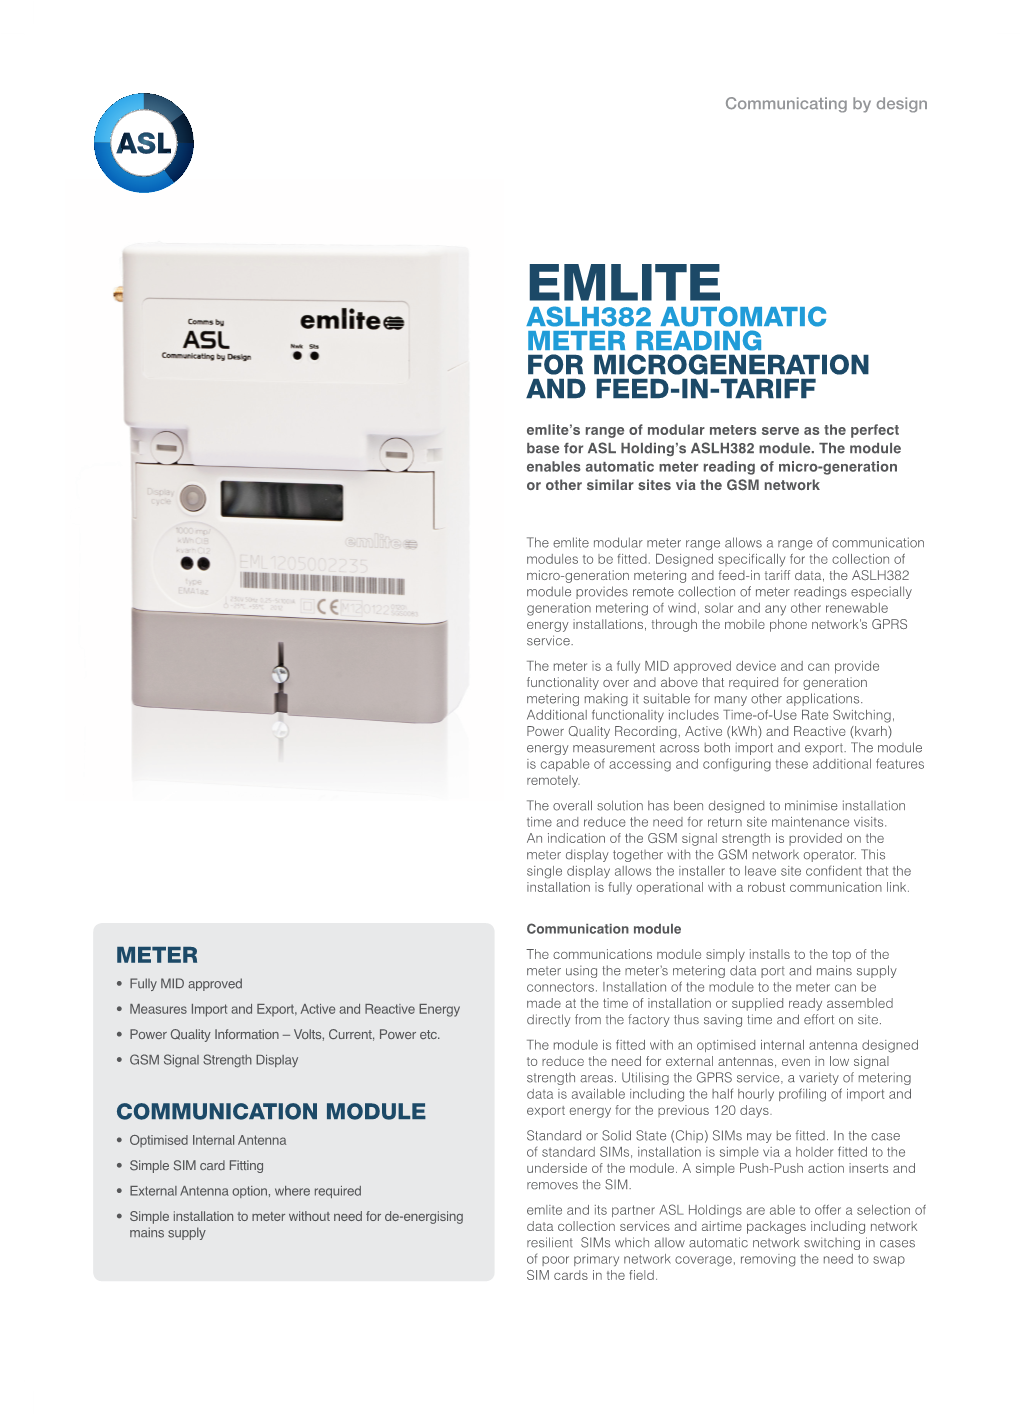 Emlite Aslh382 Automatic Meter Reading for Microgeneration and Feed-In-Tariff